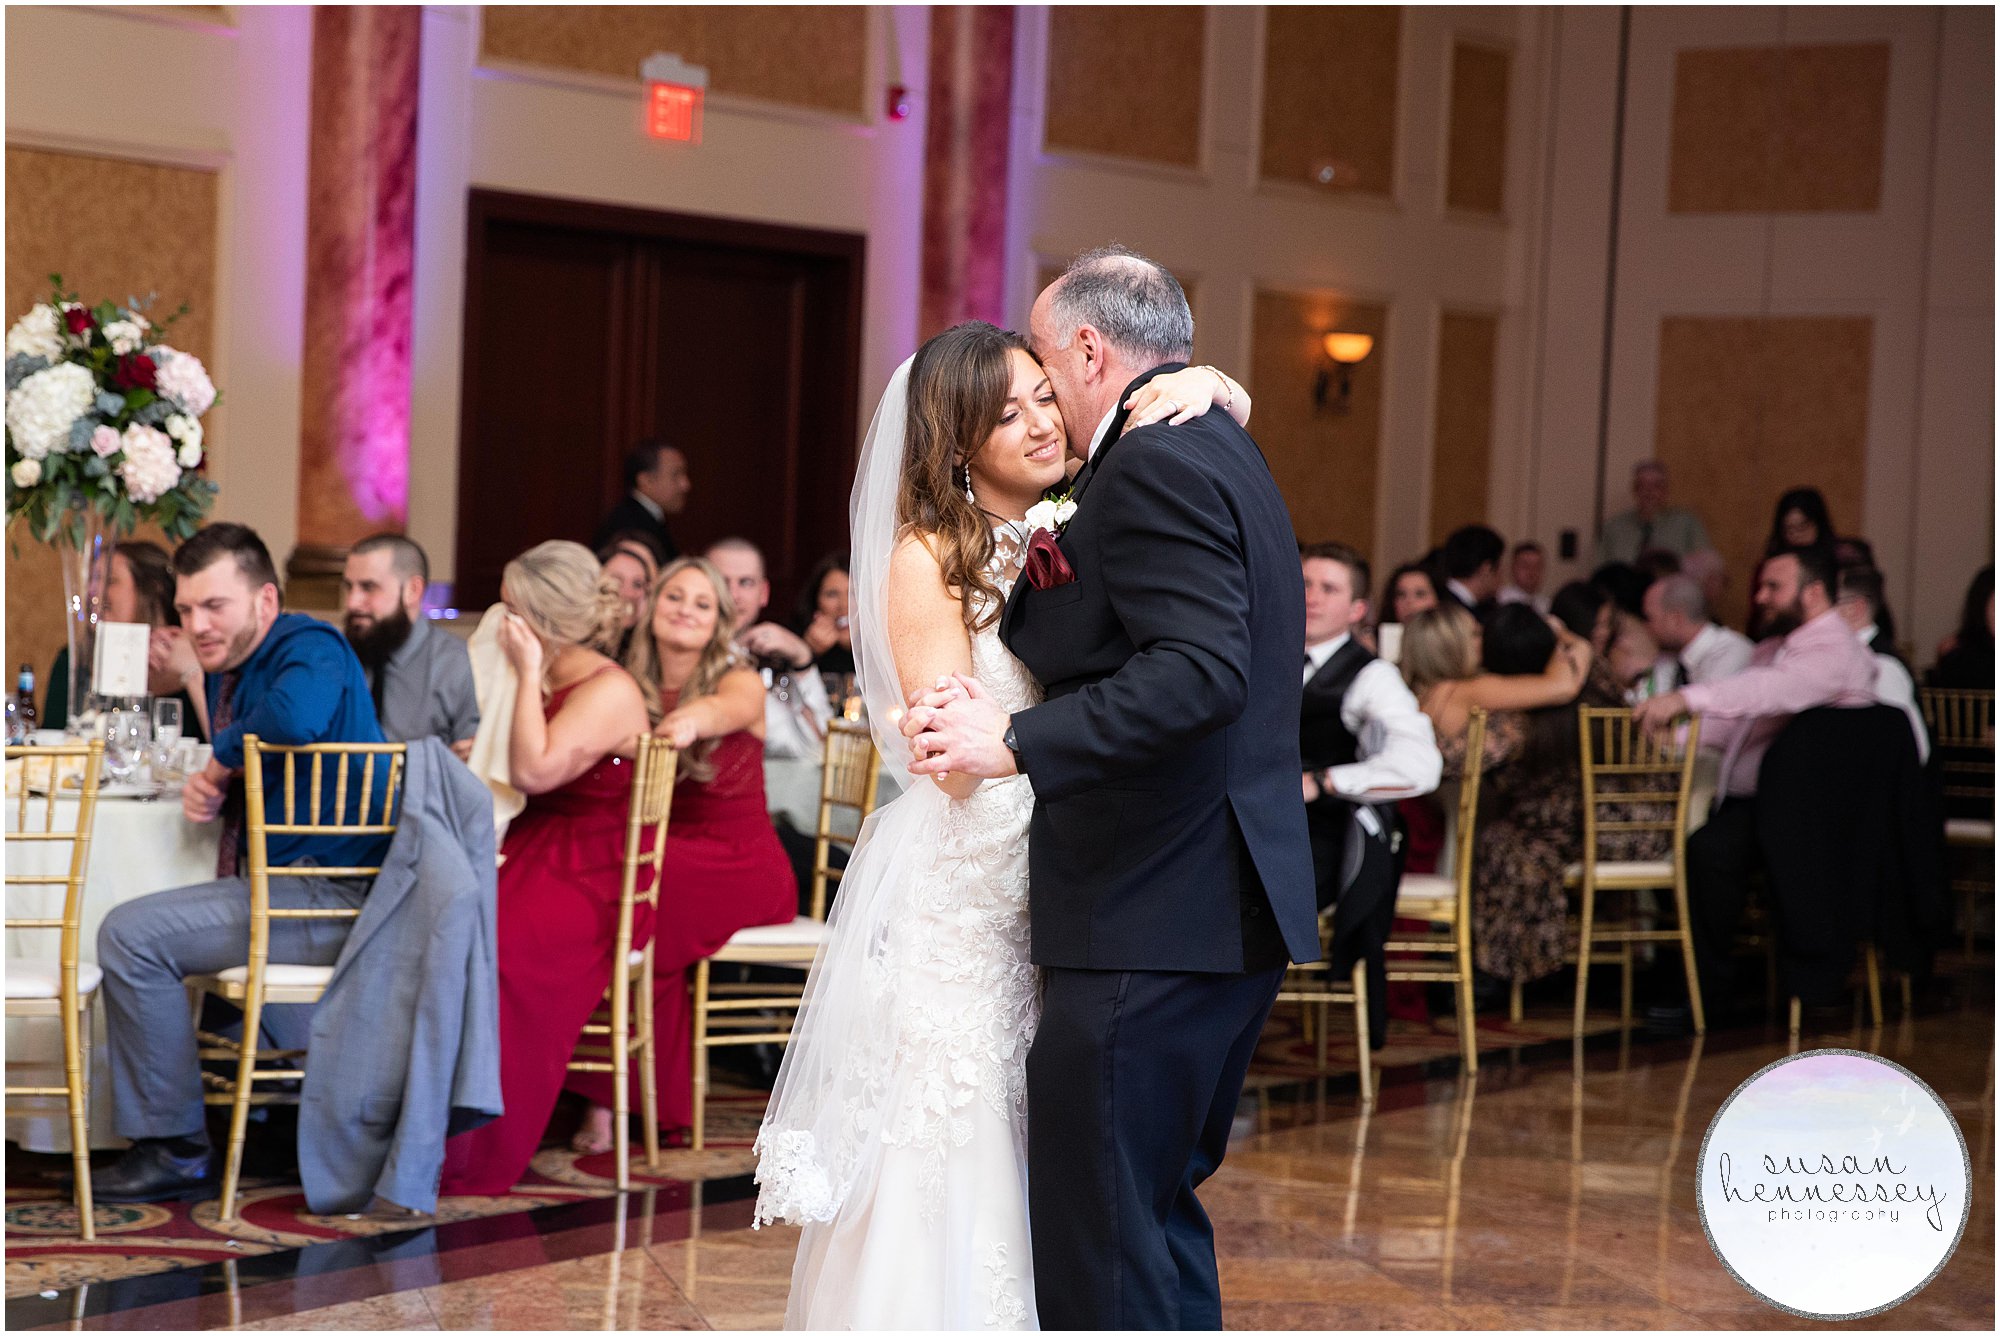 Bride dances with her father at wedding reception